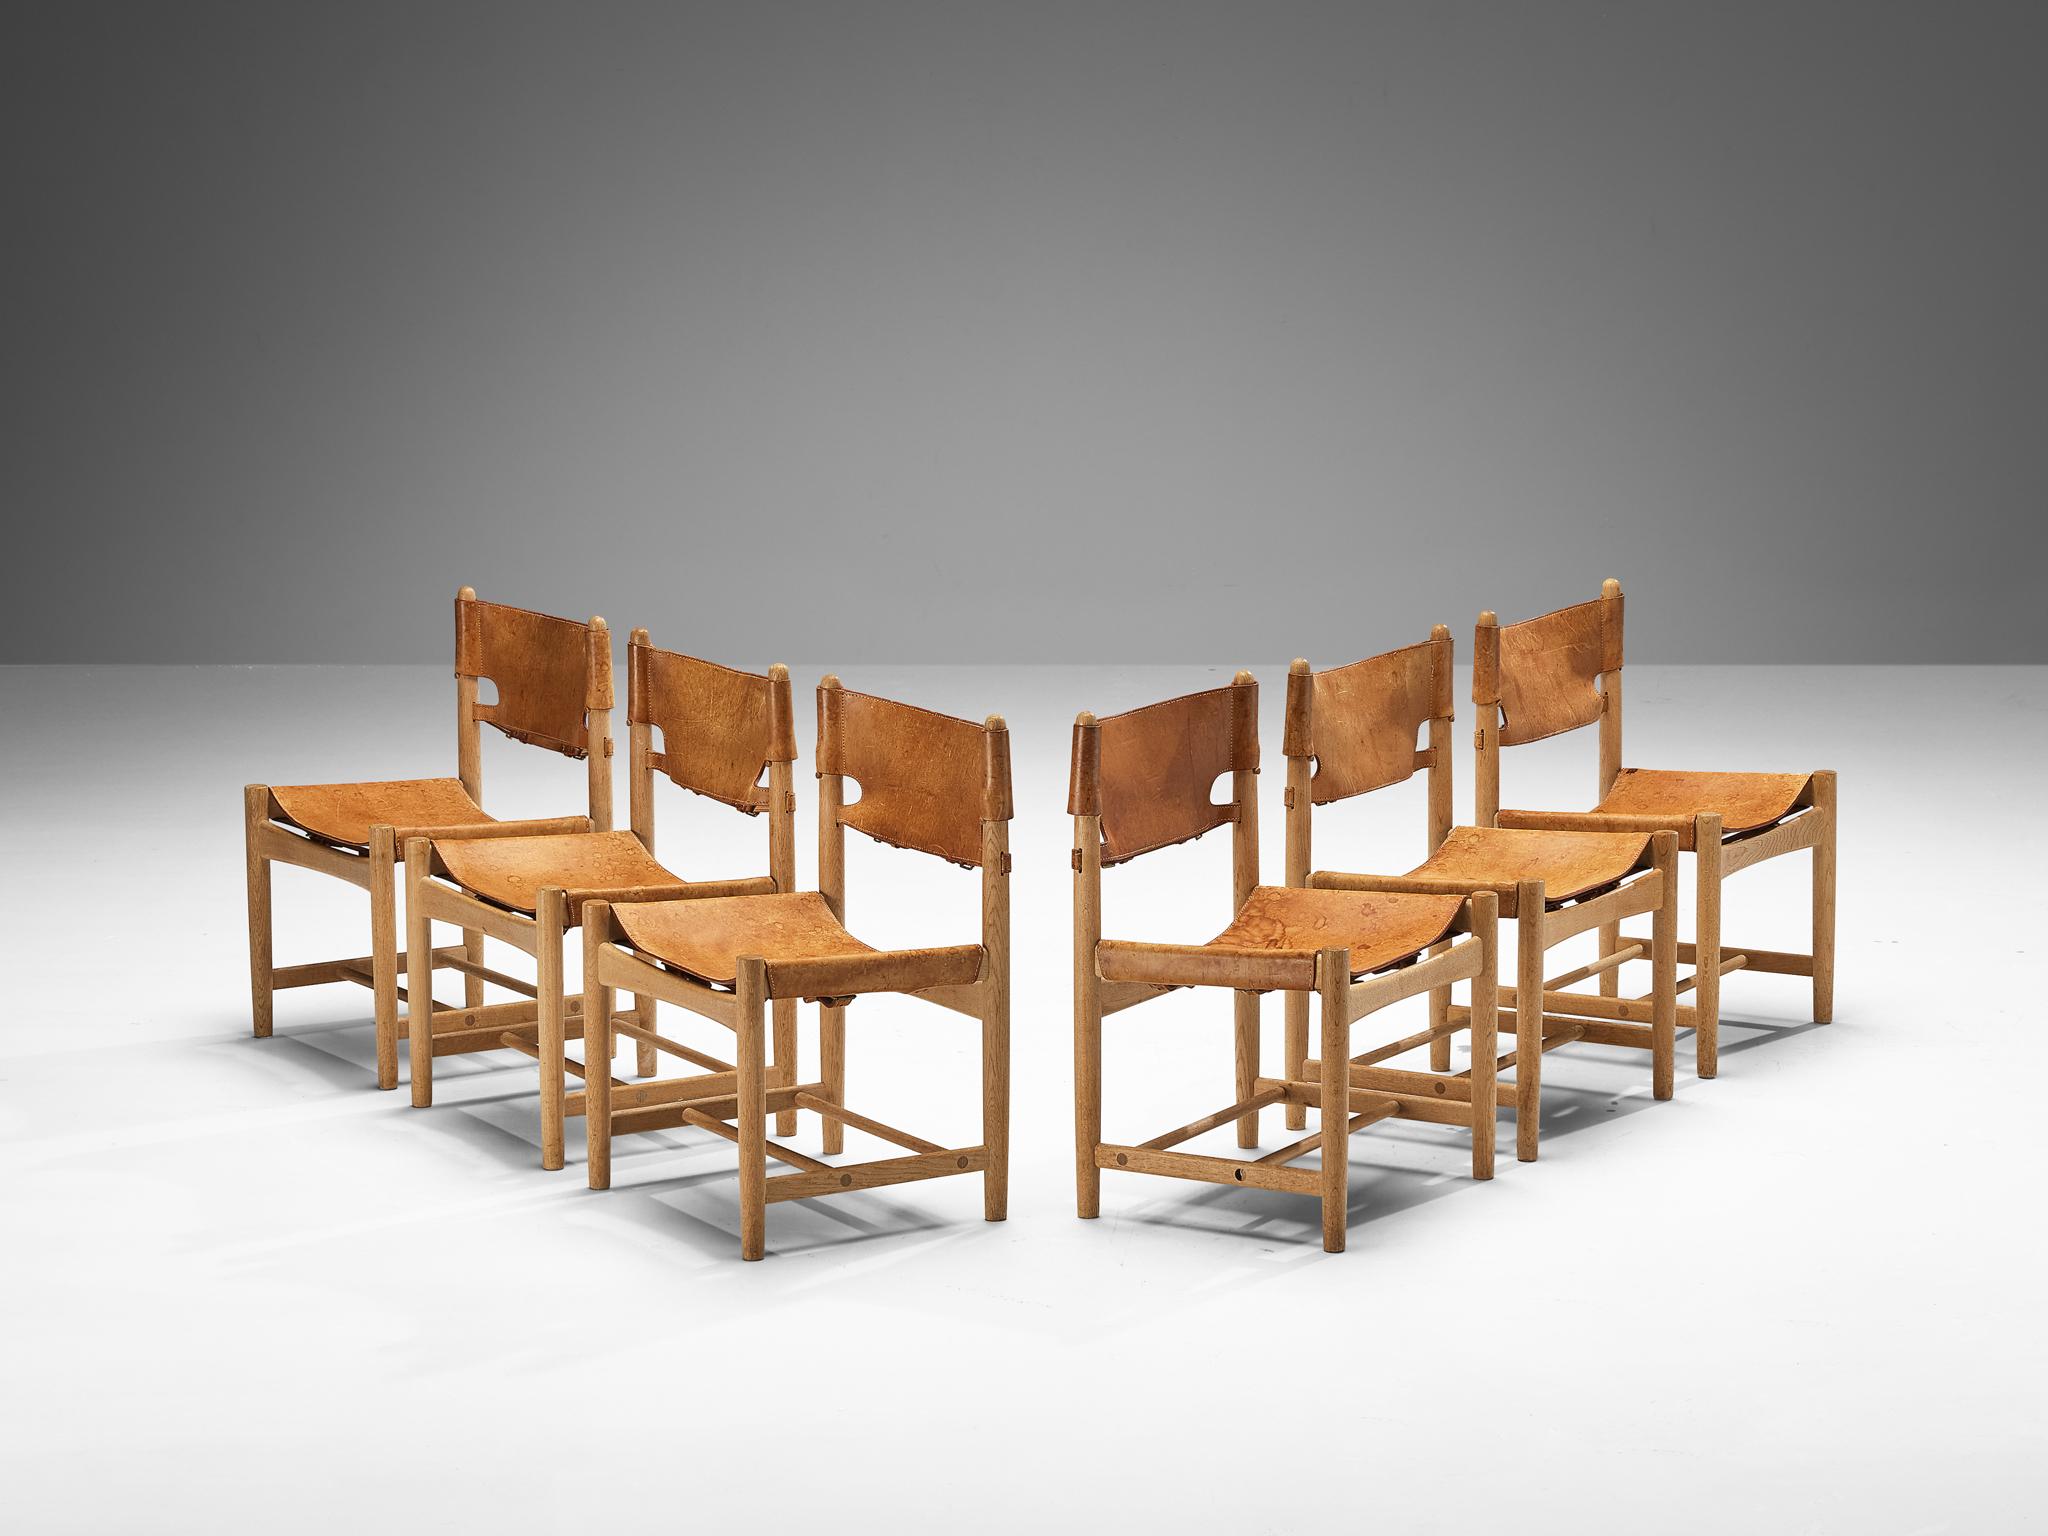 Børge Mogensen for Fredericia Stolefabrik, set of six dining chairs, oak, leather, brass, Denmark, 1964

These dining chairs remind of the classical foldable 'director-chairs', yet this design by Danish designer Børge Mogensen (1914-1972) is from a